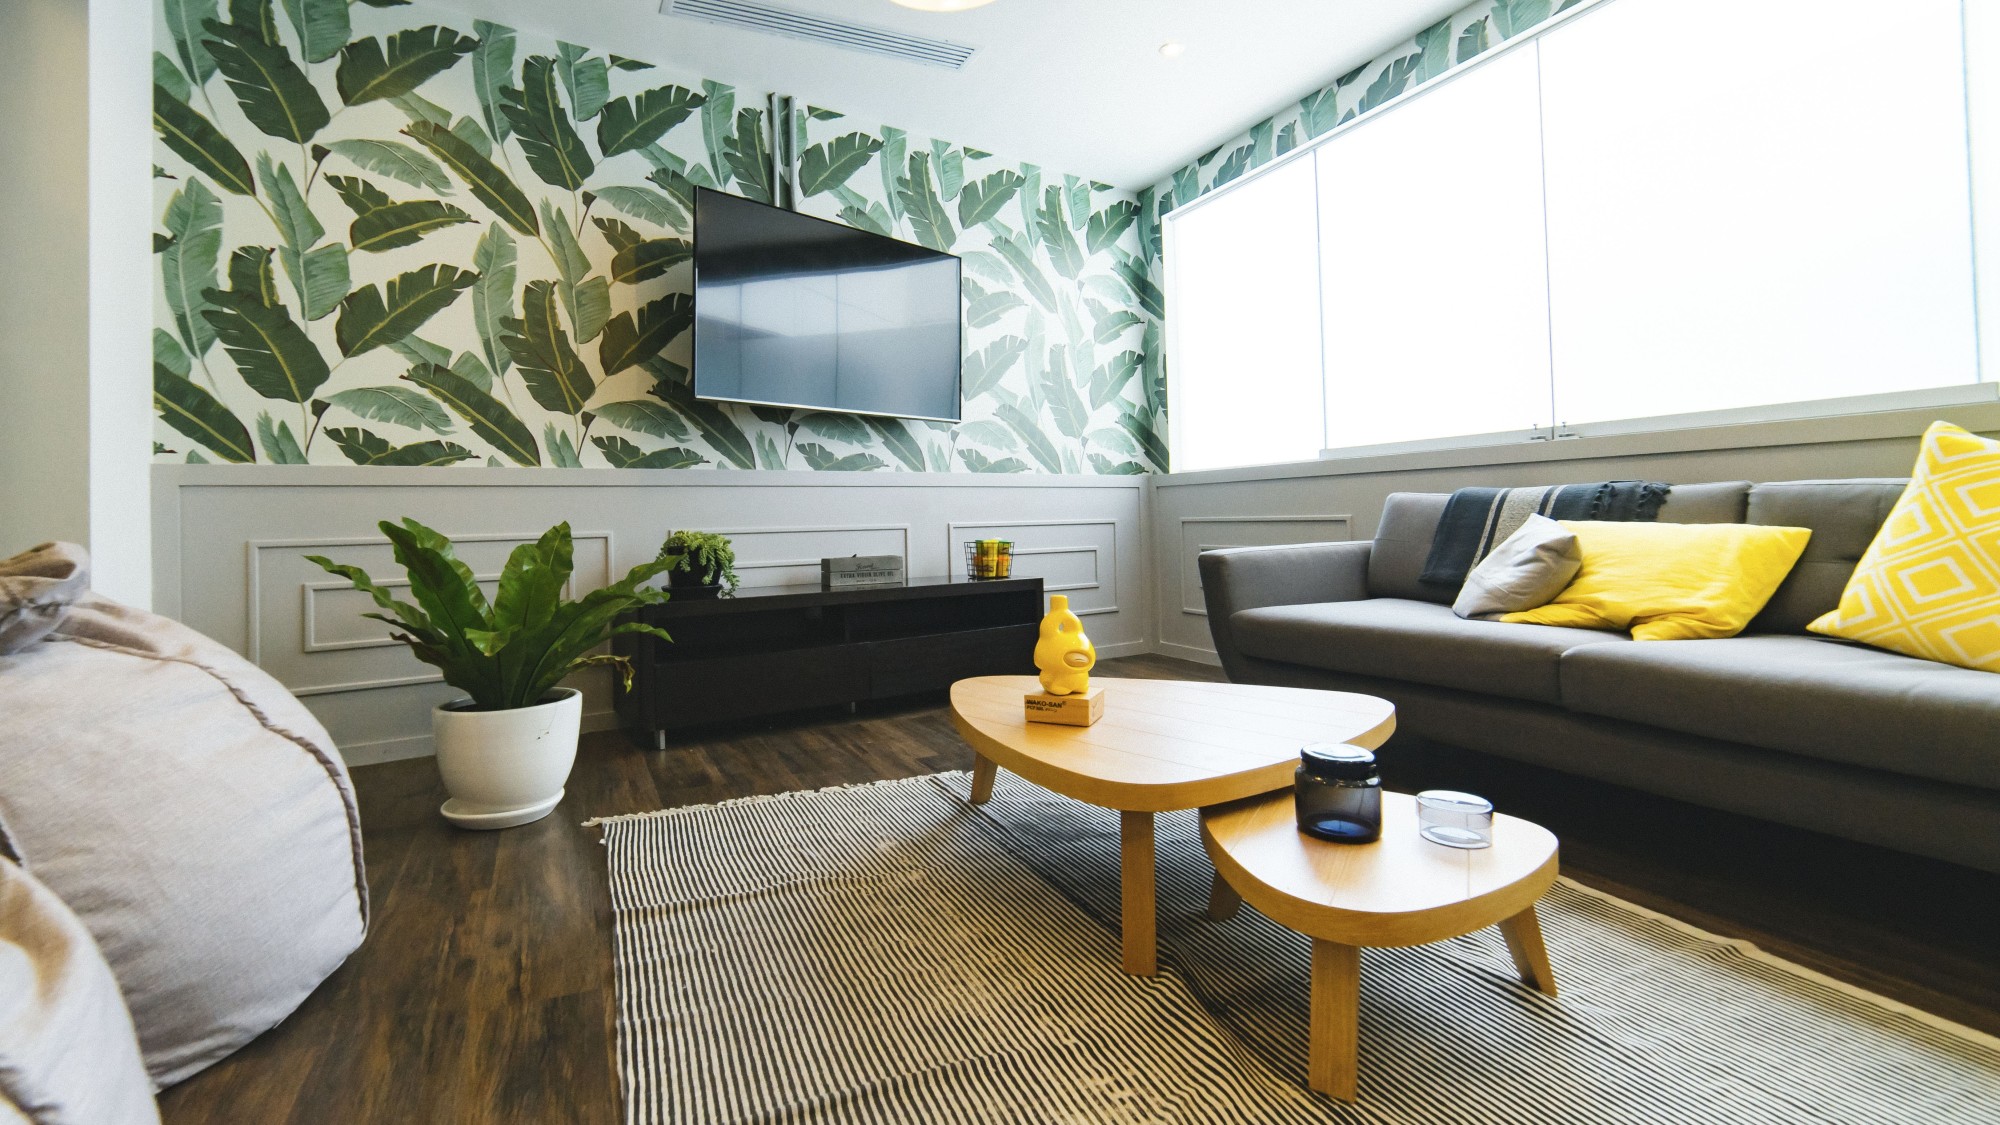 Creating an accent wall for a TV means painting or adding wallpaper to match your style. Learn about four ideas for your home here.